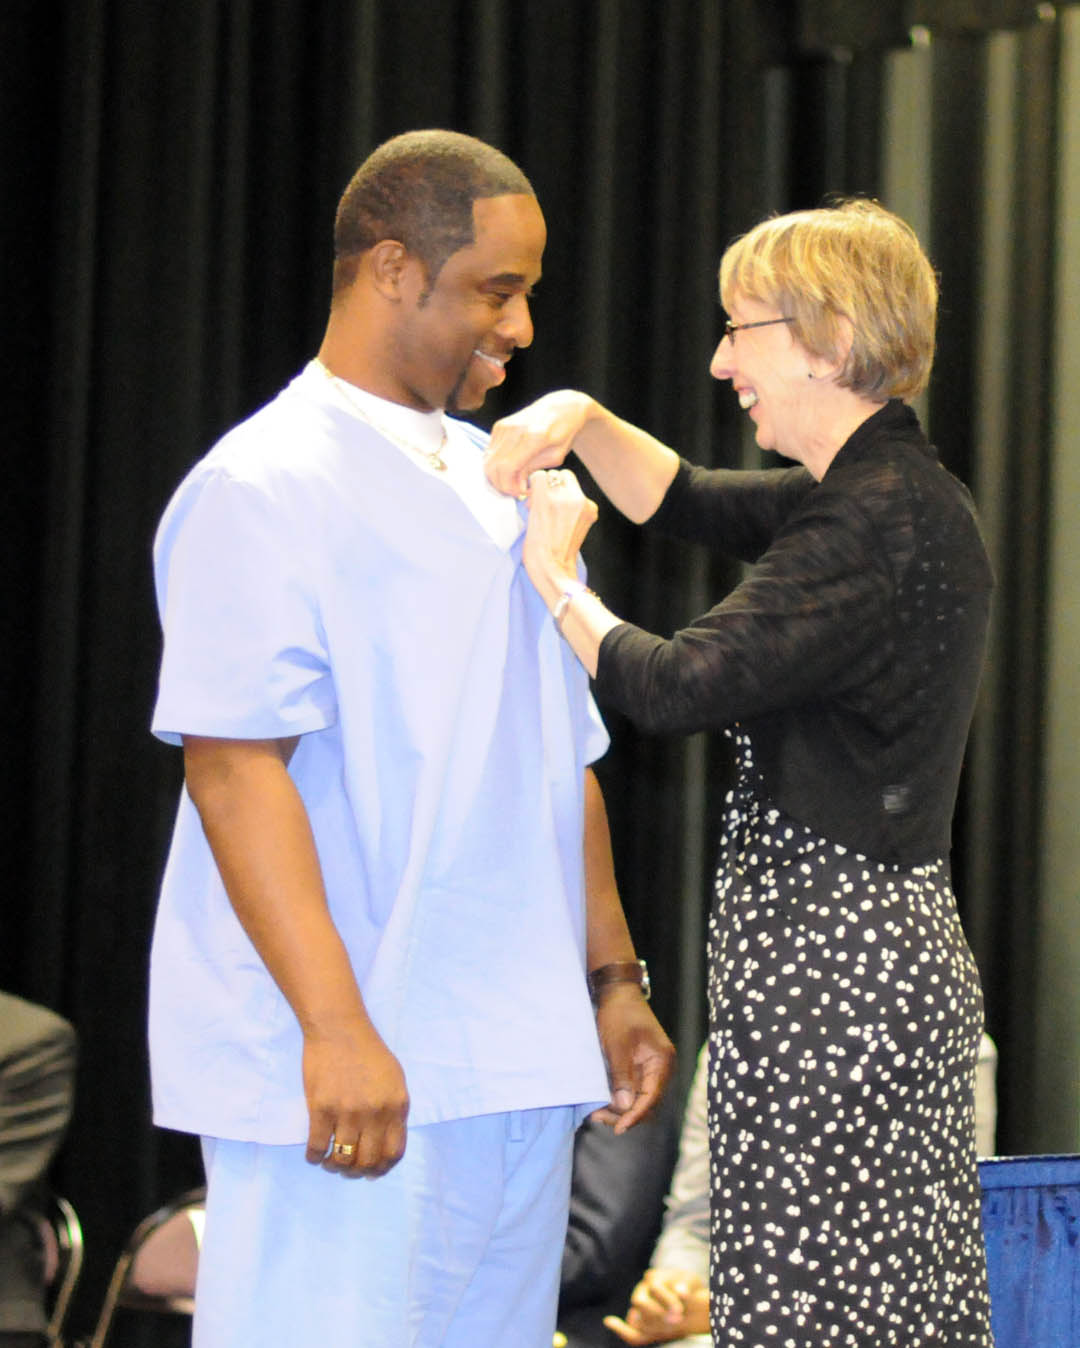 CCCC Con Ed holds medical graduation